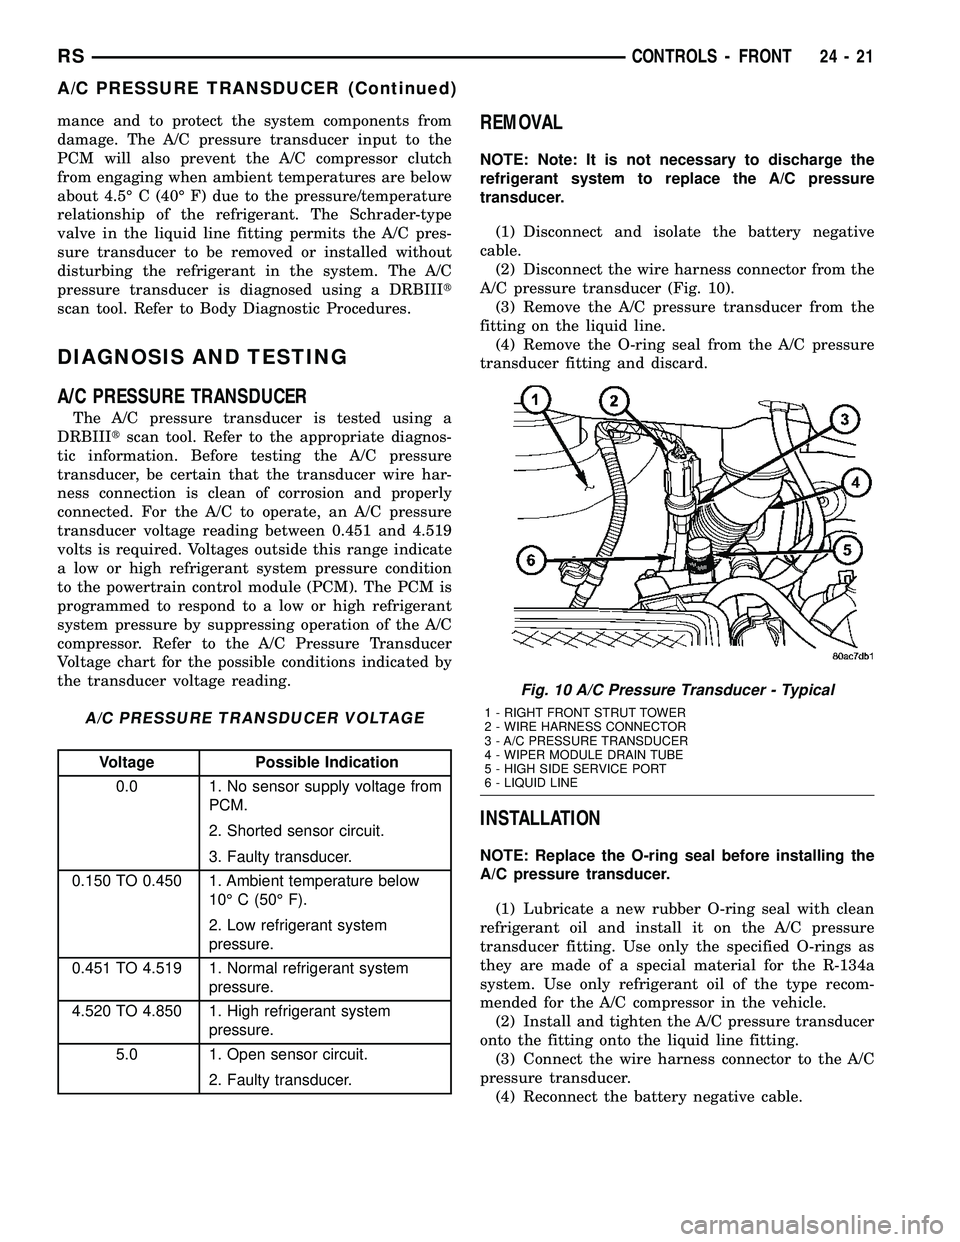 CHRYSLER VOYAGER 2005  Service Manual mance and to protect the system components from
damage. The A/C pressure transducer input to the
PCM will also prevent the A/C compressor clutch
from engaging when ambient temperatures are below
about